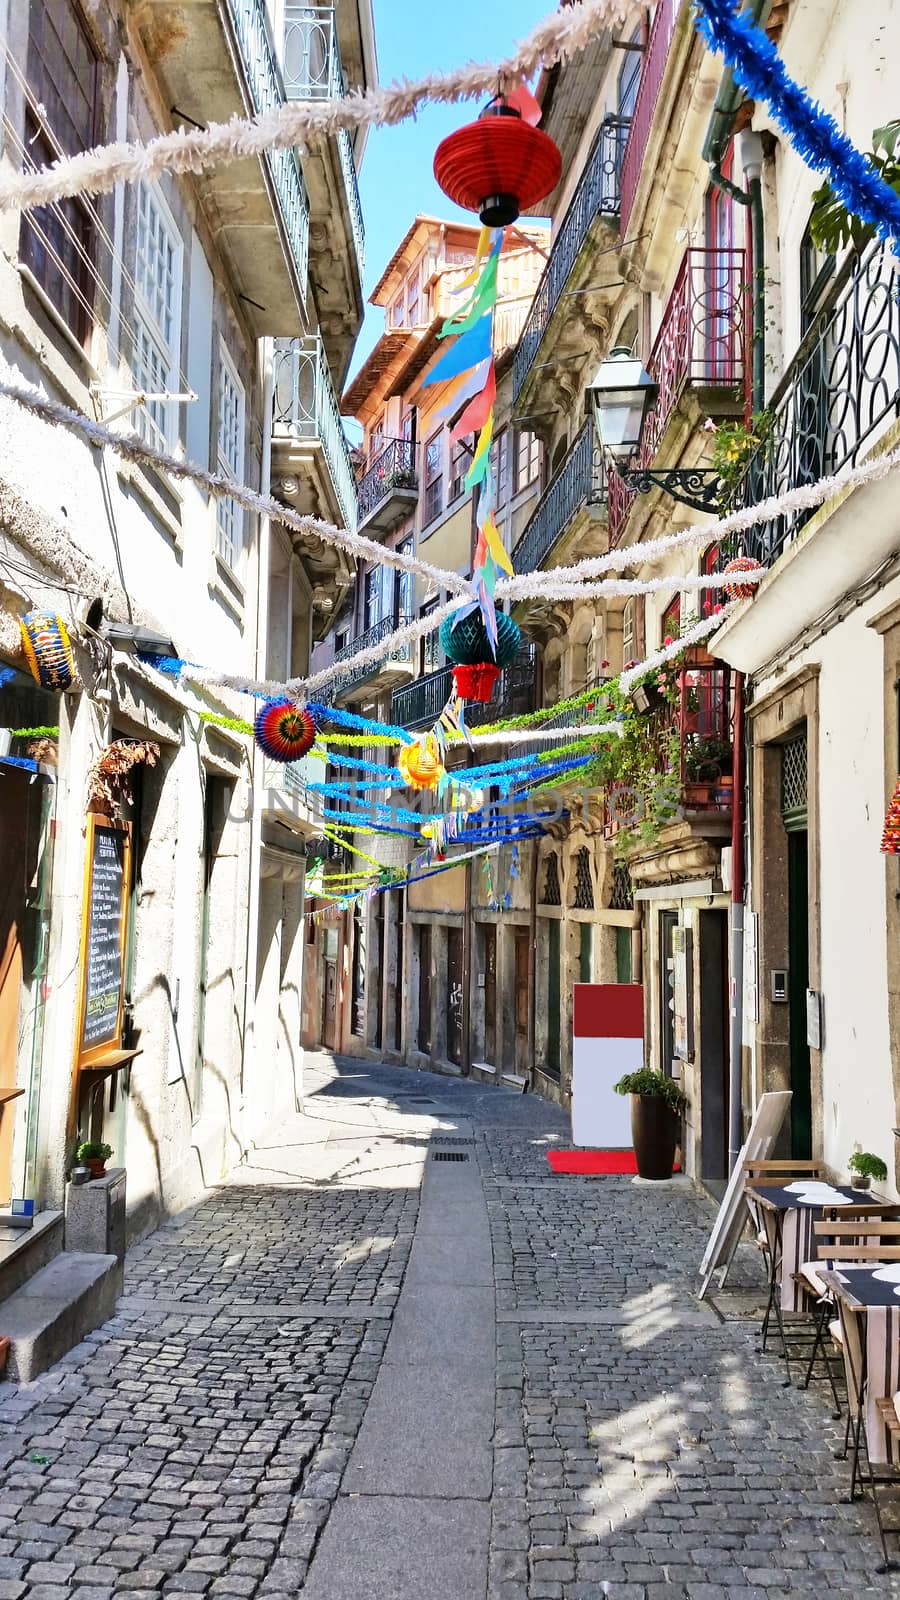 Old decorated street in Porto Portugal by devy